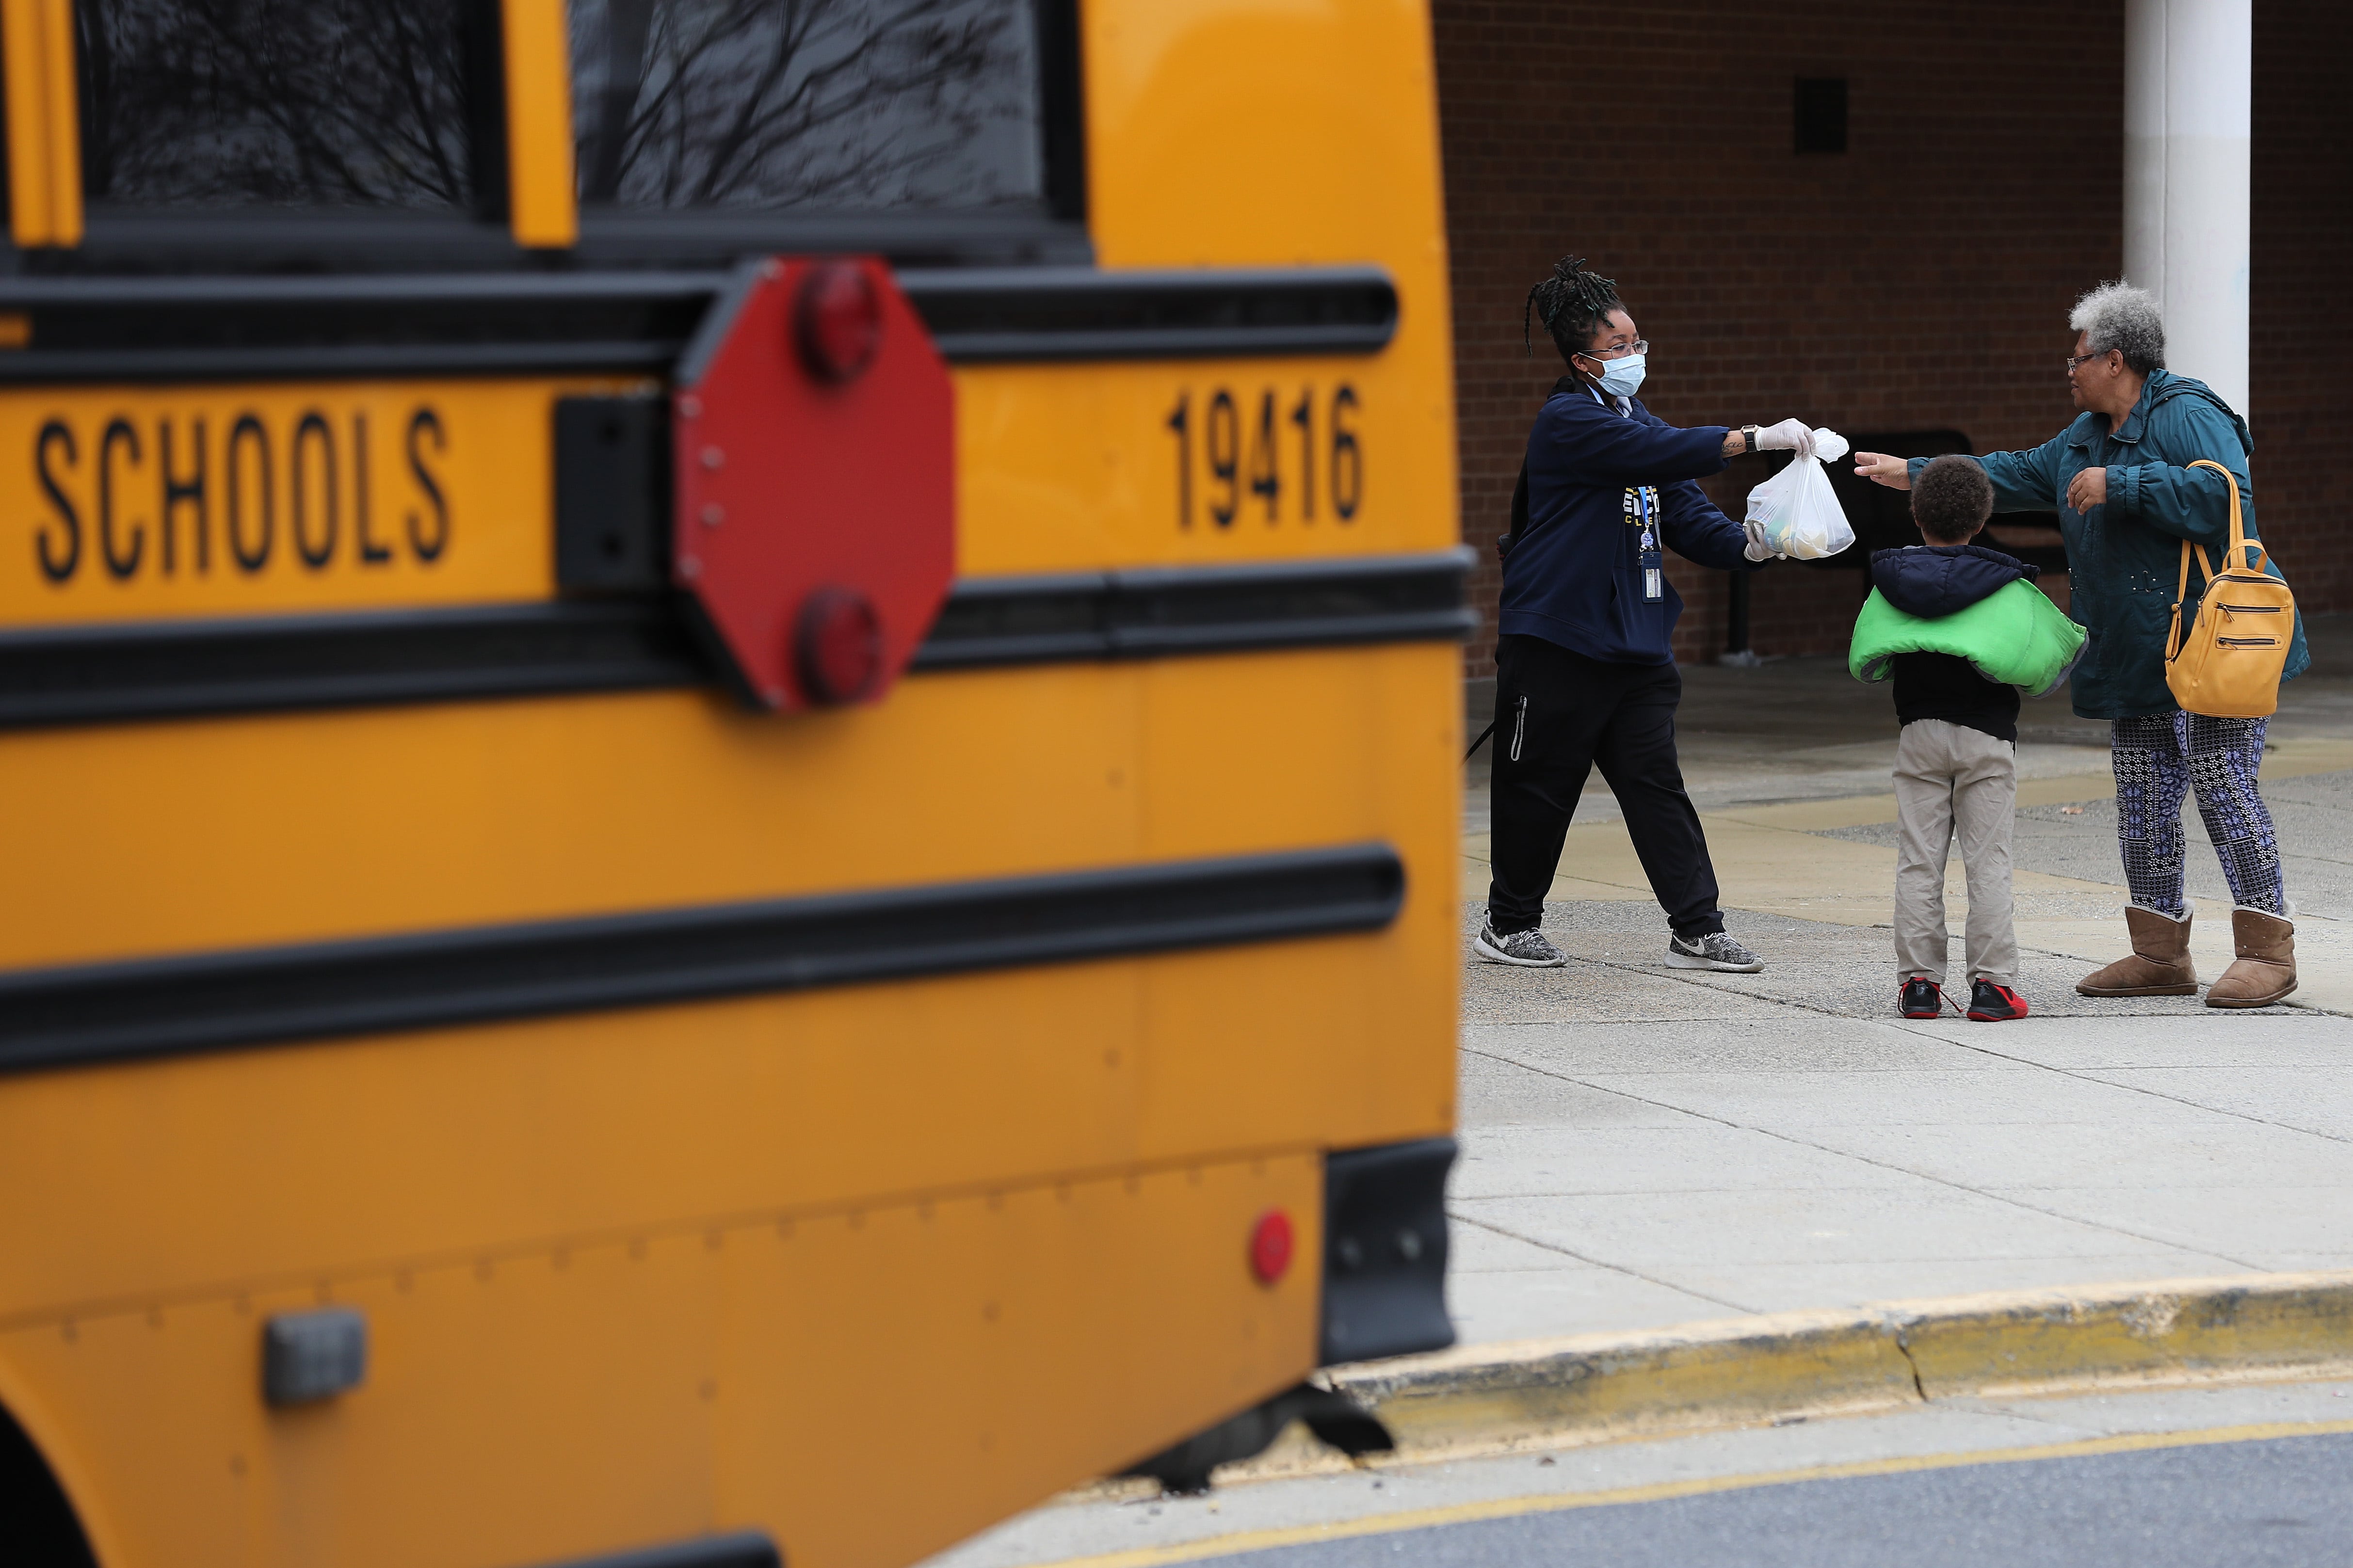 GAITHERSBURG, MARYLAND - MARCH 20: Montgomery County Public Schools Special Needs Bus Attendant Zanashia Rowe helps distribute bags of food donated by Manna Food Center at Quince Orchard High School as part of a program to feed children while schools are closed due to the coronavirus March 20, 2020 in Gaithersburg, Maryland. Millions of children across the country rely on meals they get at school, which are closed in an attempt to suppress transmission of the COVID-19 virus.